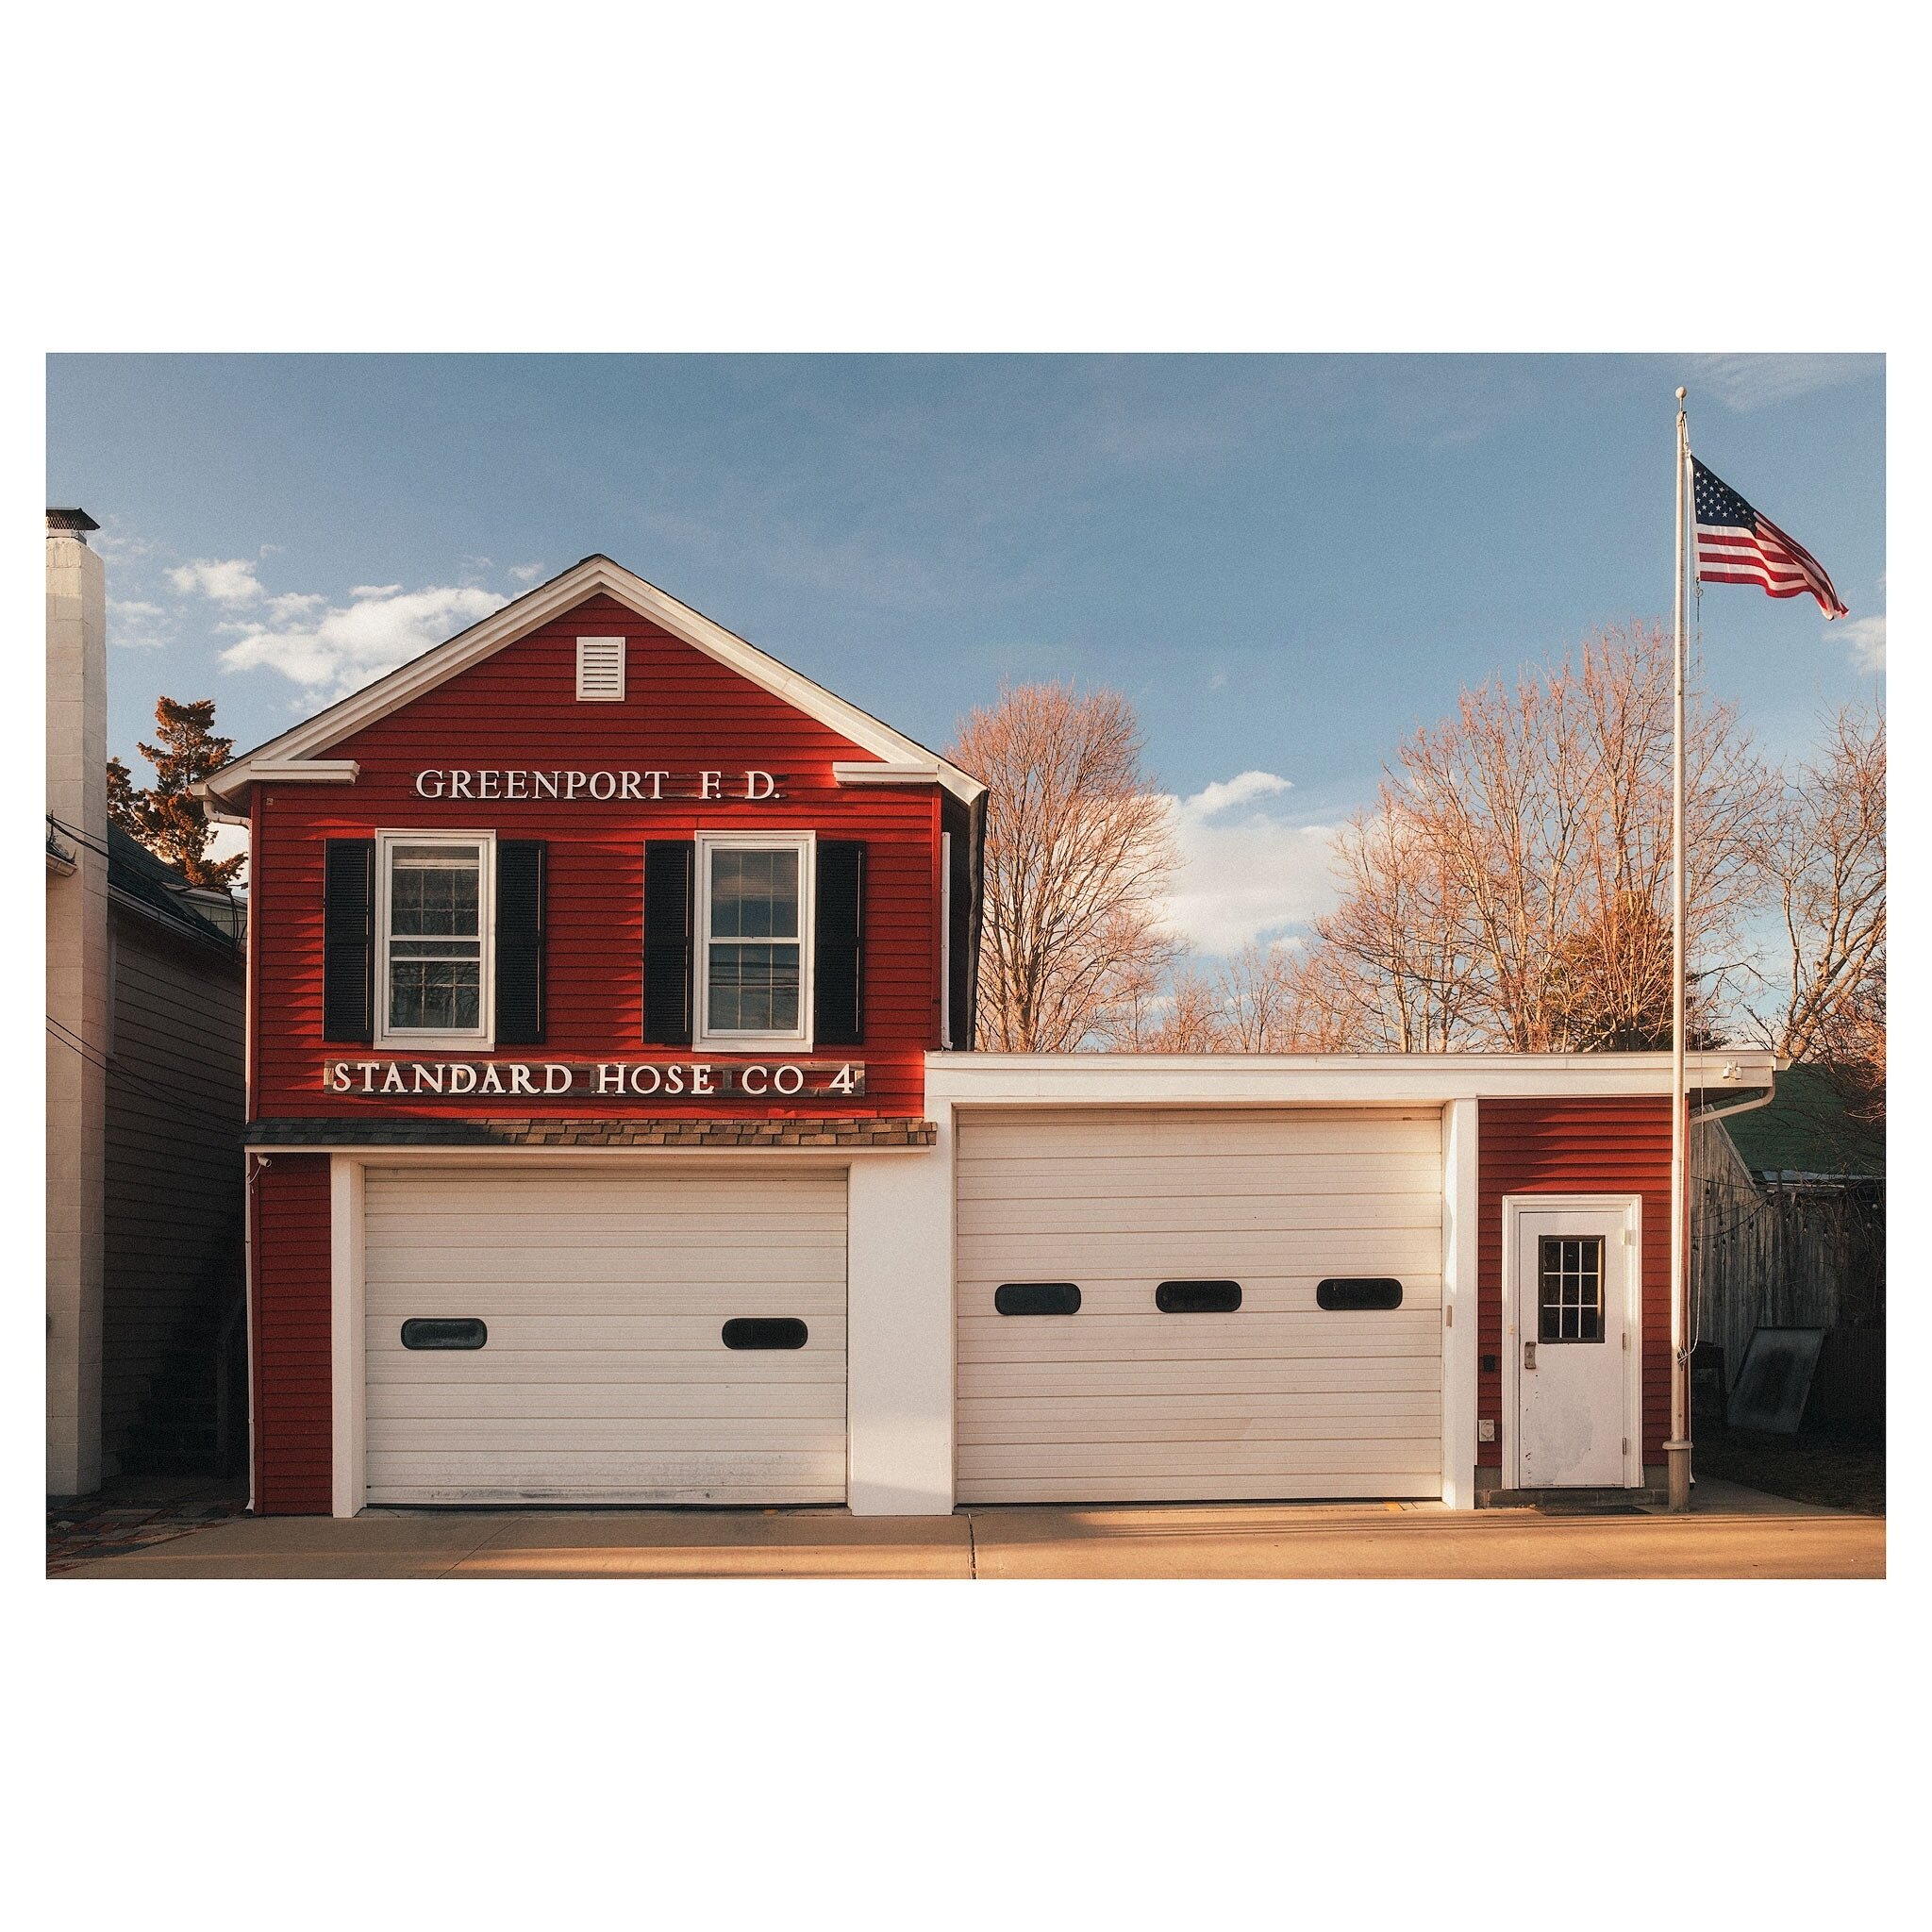 I've always admired this charming, quirky little red firehouse. It's wonderful that, even after all these years, it continues to serve as the active station for @standardhose. While I understand there may be arguments for updating it to a larger, mor